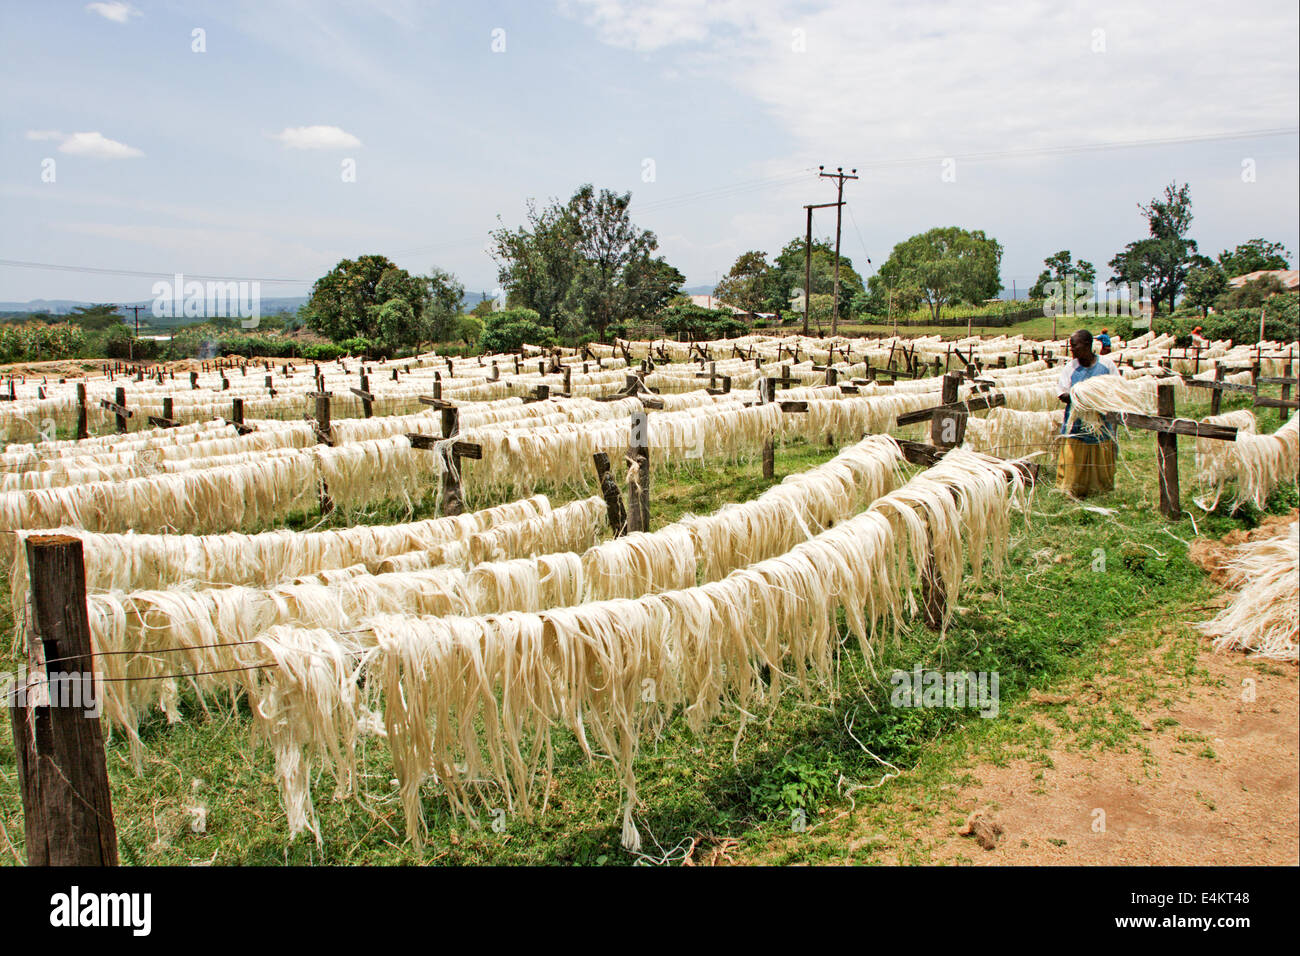 Sisal (Agave sisalana) drying. This fiber is used for the manufacturing of rope. Photographed in Kenya Stock Photo